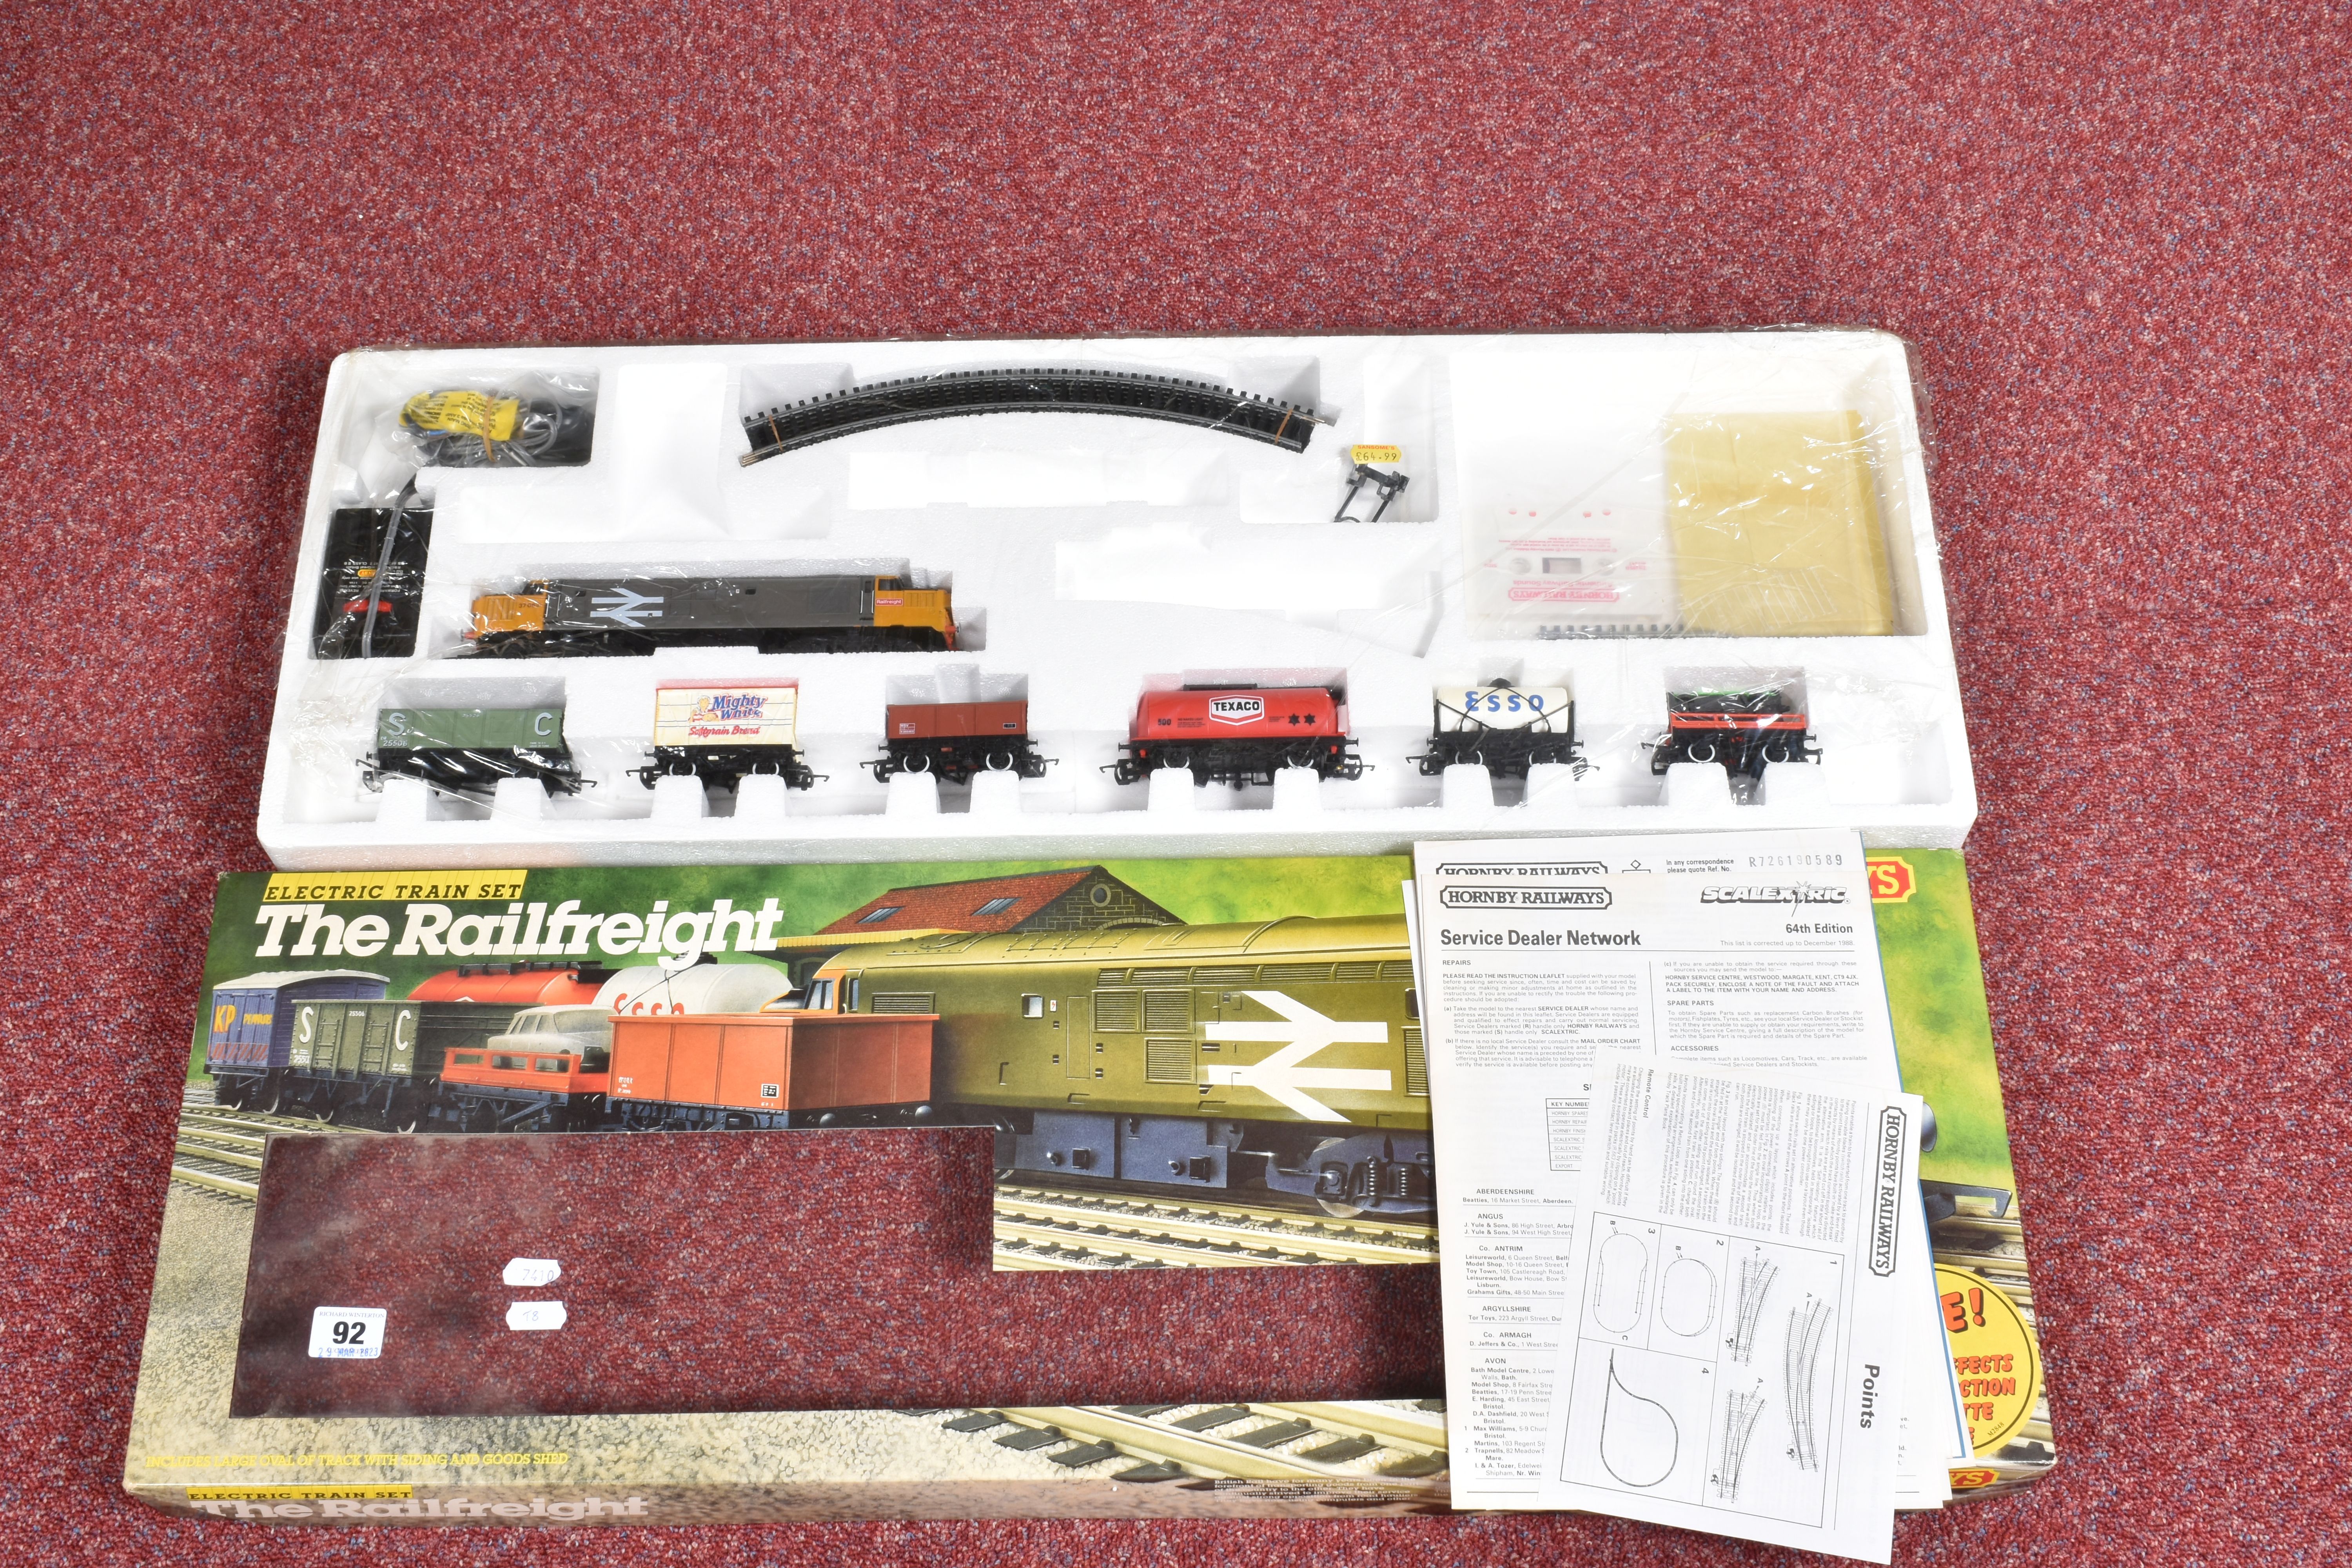 A BOXED HORNBY OO GAUGE THE RAILFREIGHT TRAIN SET, No.R726, comprising class 37 locomotive No.37 - Image 3 of 5